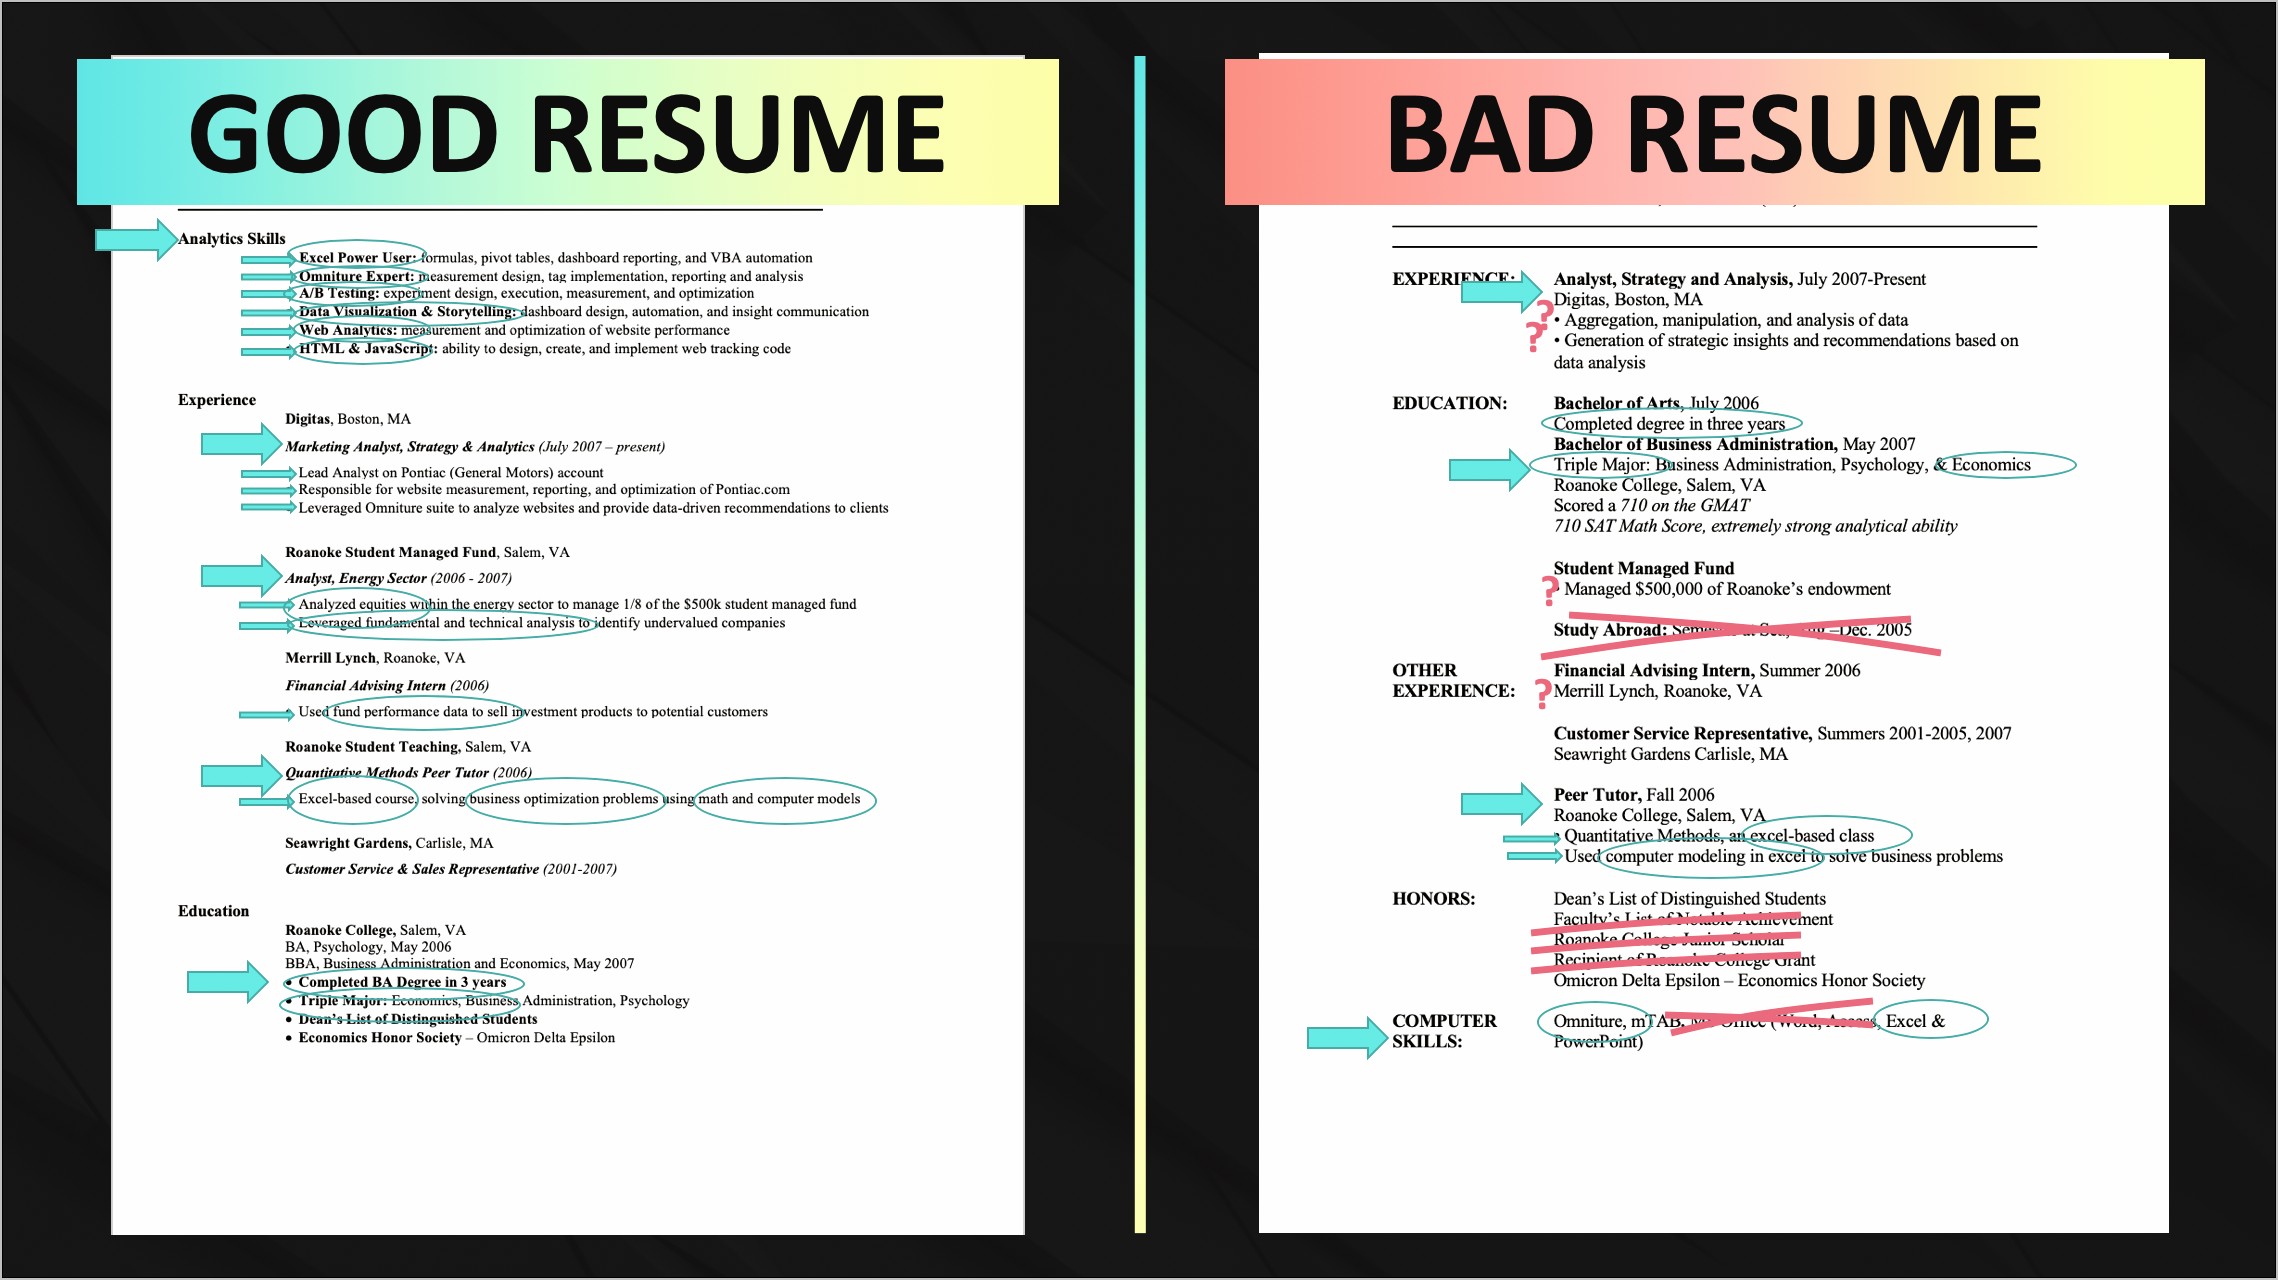 Examples Of Not Good Resumes